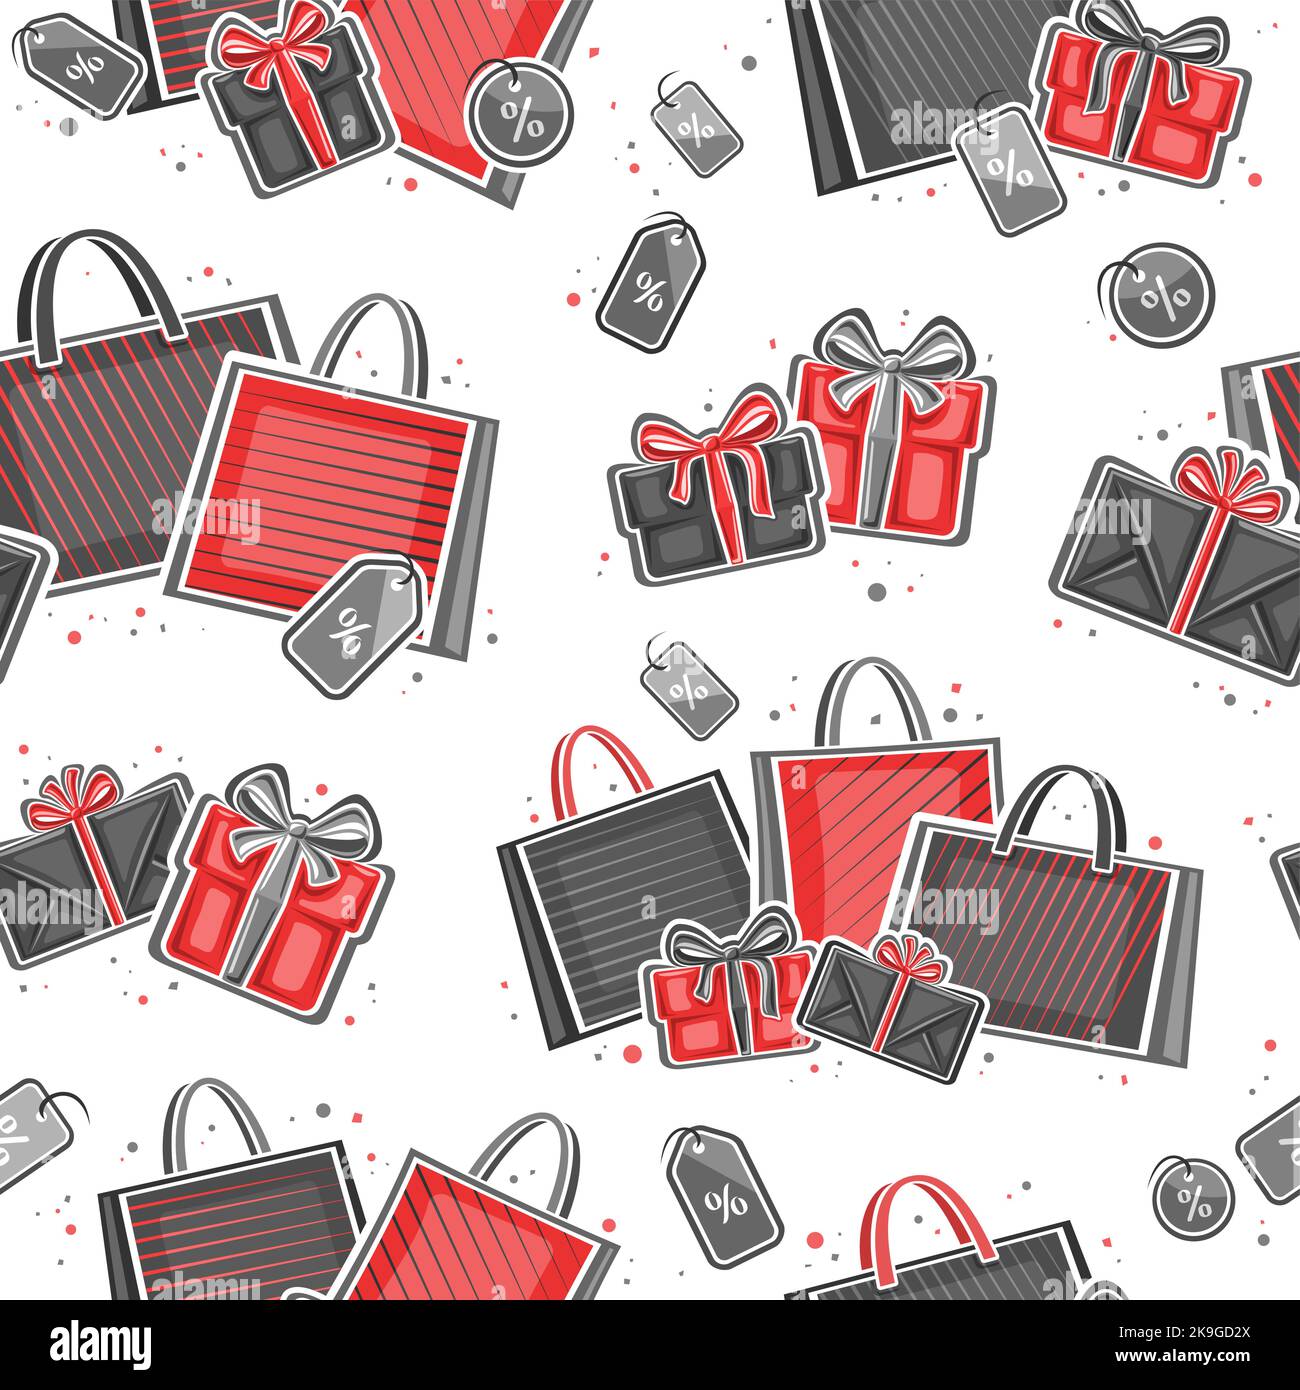 Vector Black Friday seamless pattern, square repeating background with illustrations of red paper bags, gift boxes and decorative price tags on white Stock Vector